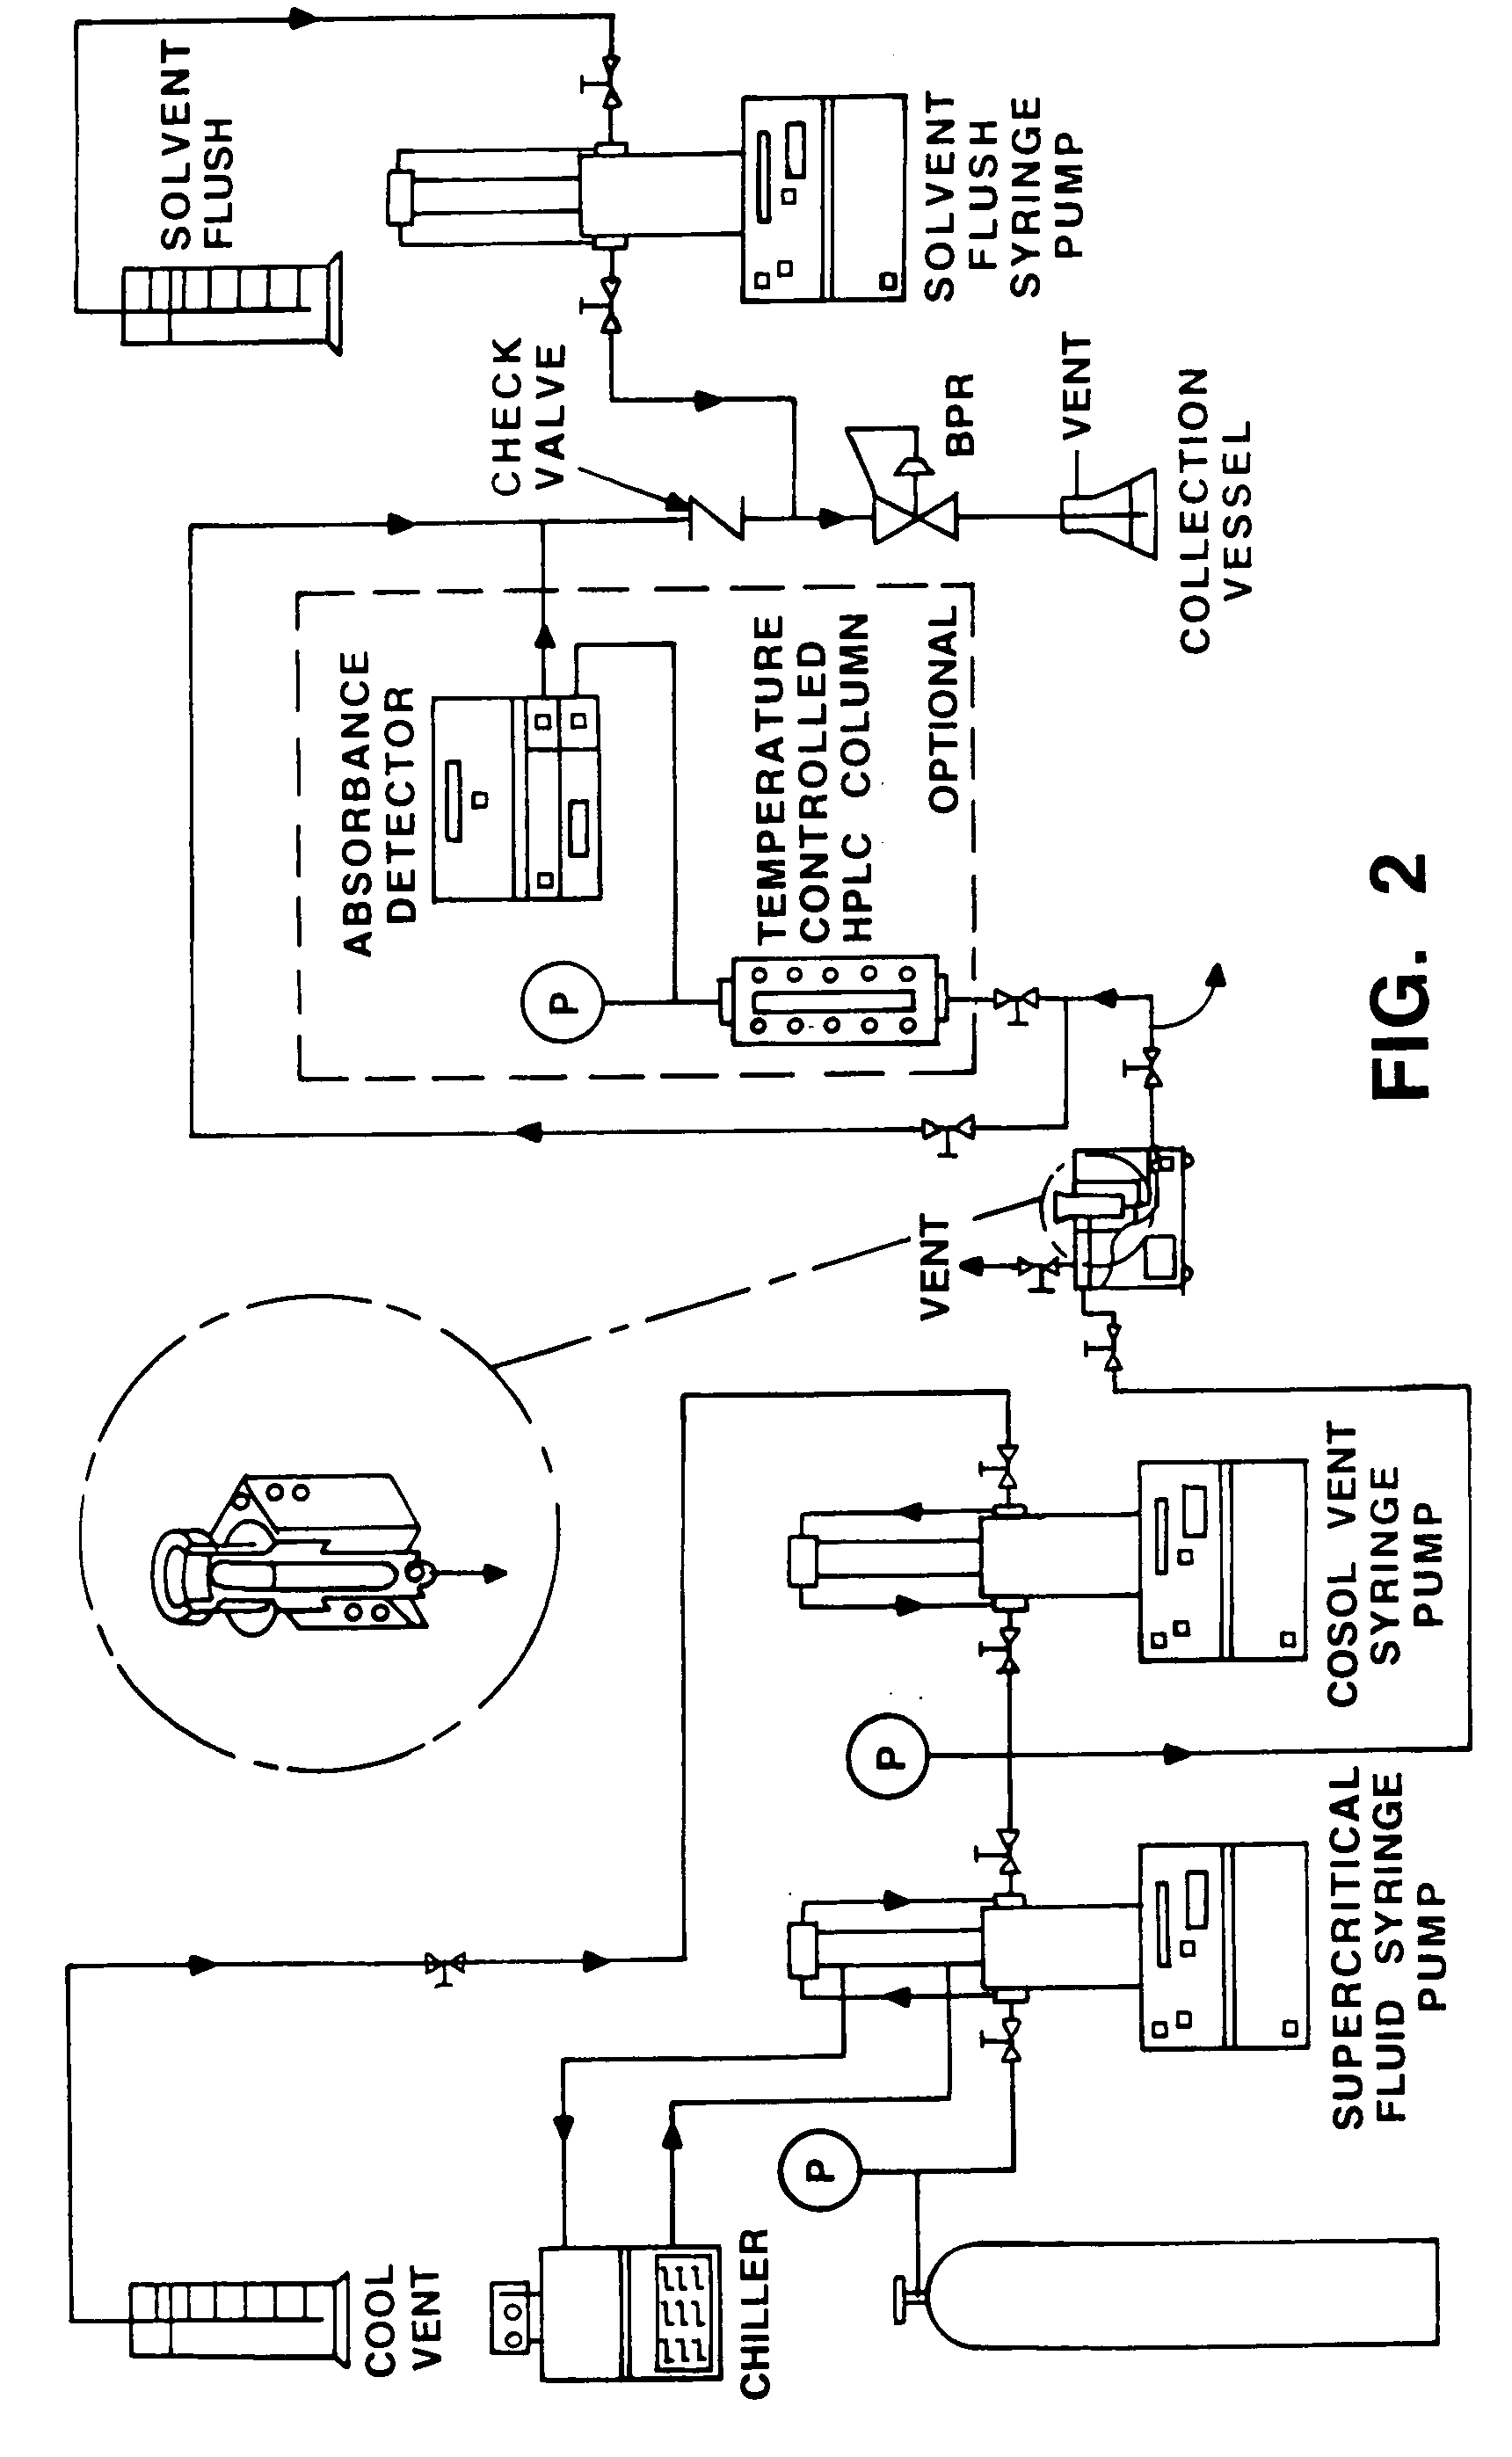 Compositions and methods for inhibiting 5-alpha reductase